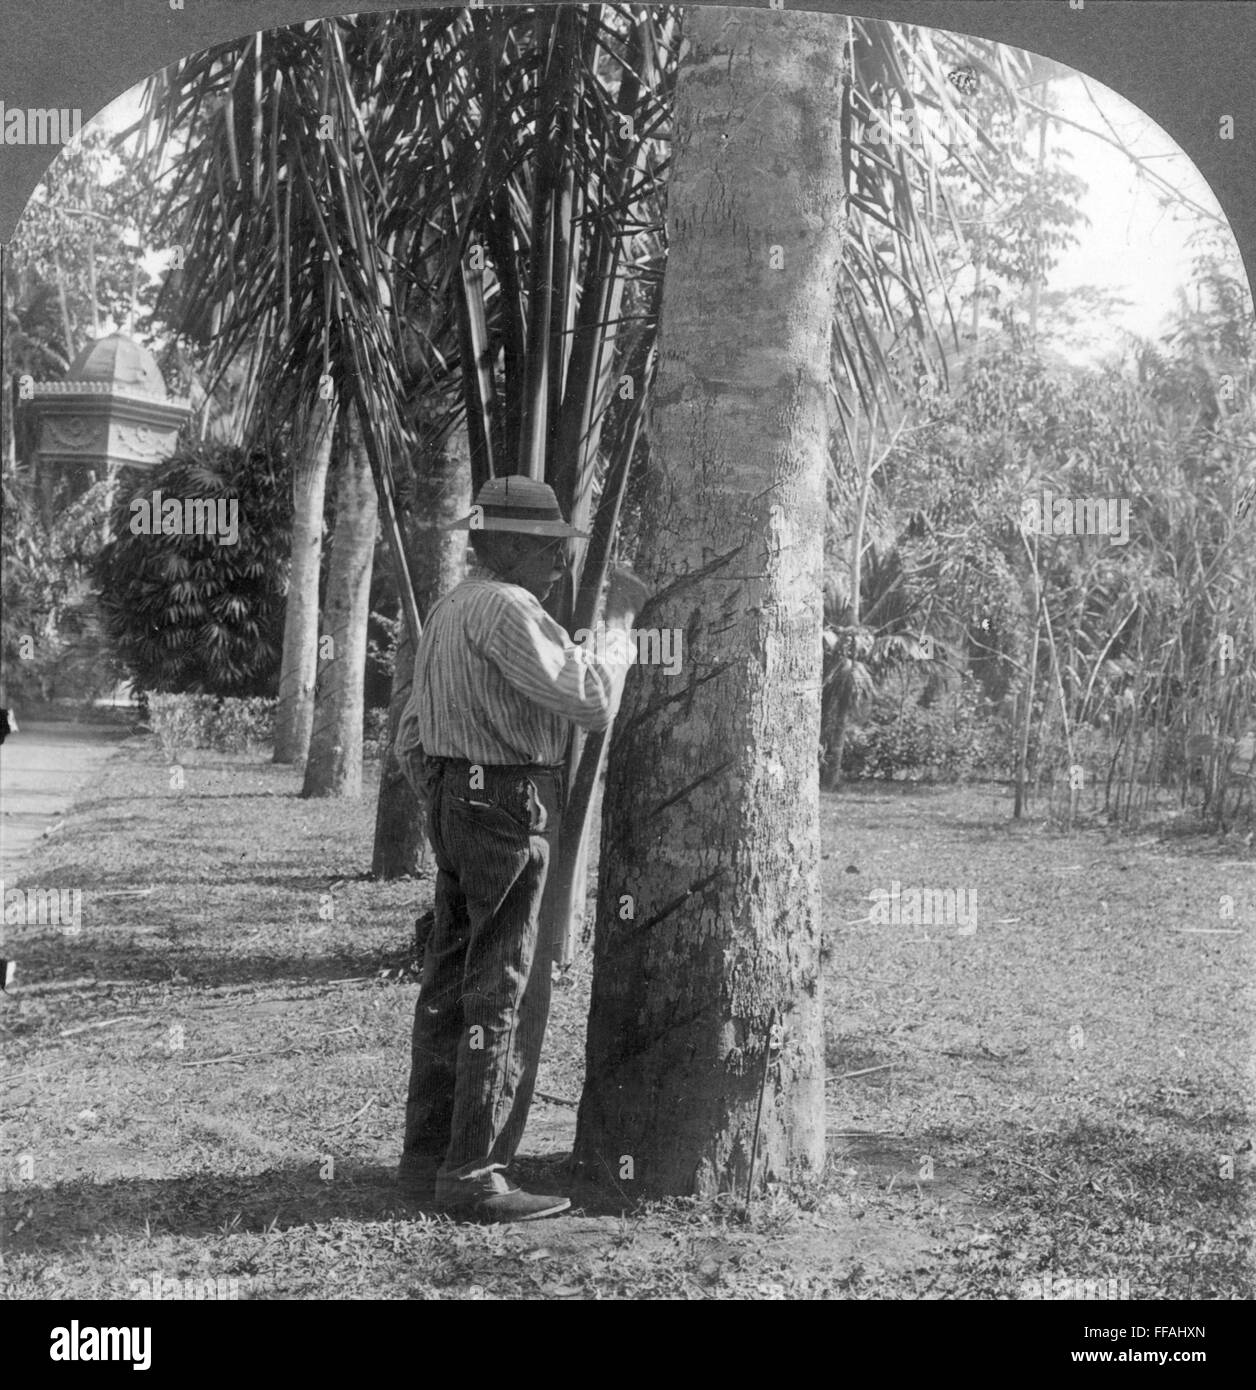 RUBBER TAPPING, c1915. /nTapping a rubber tree in Brazil: photograph, c1915. Stock Photo